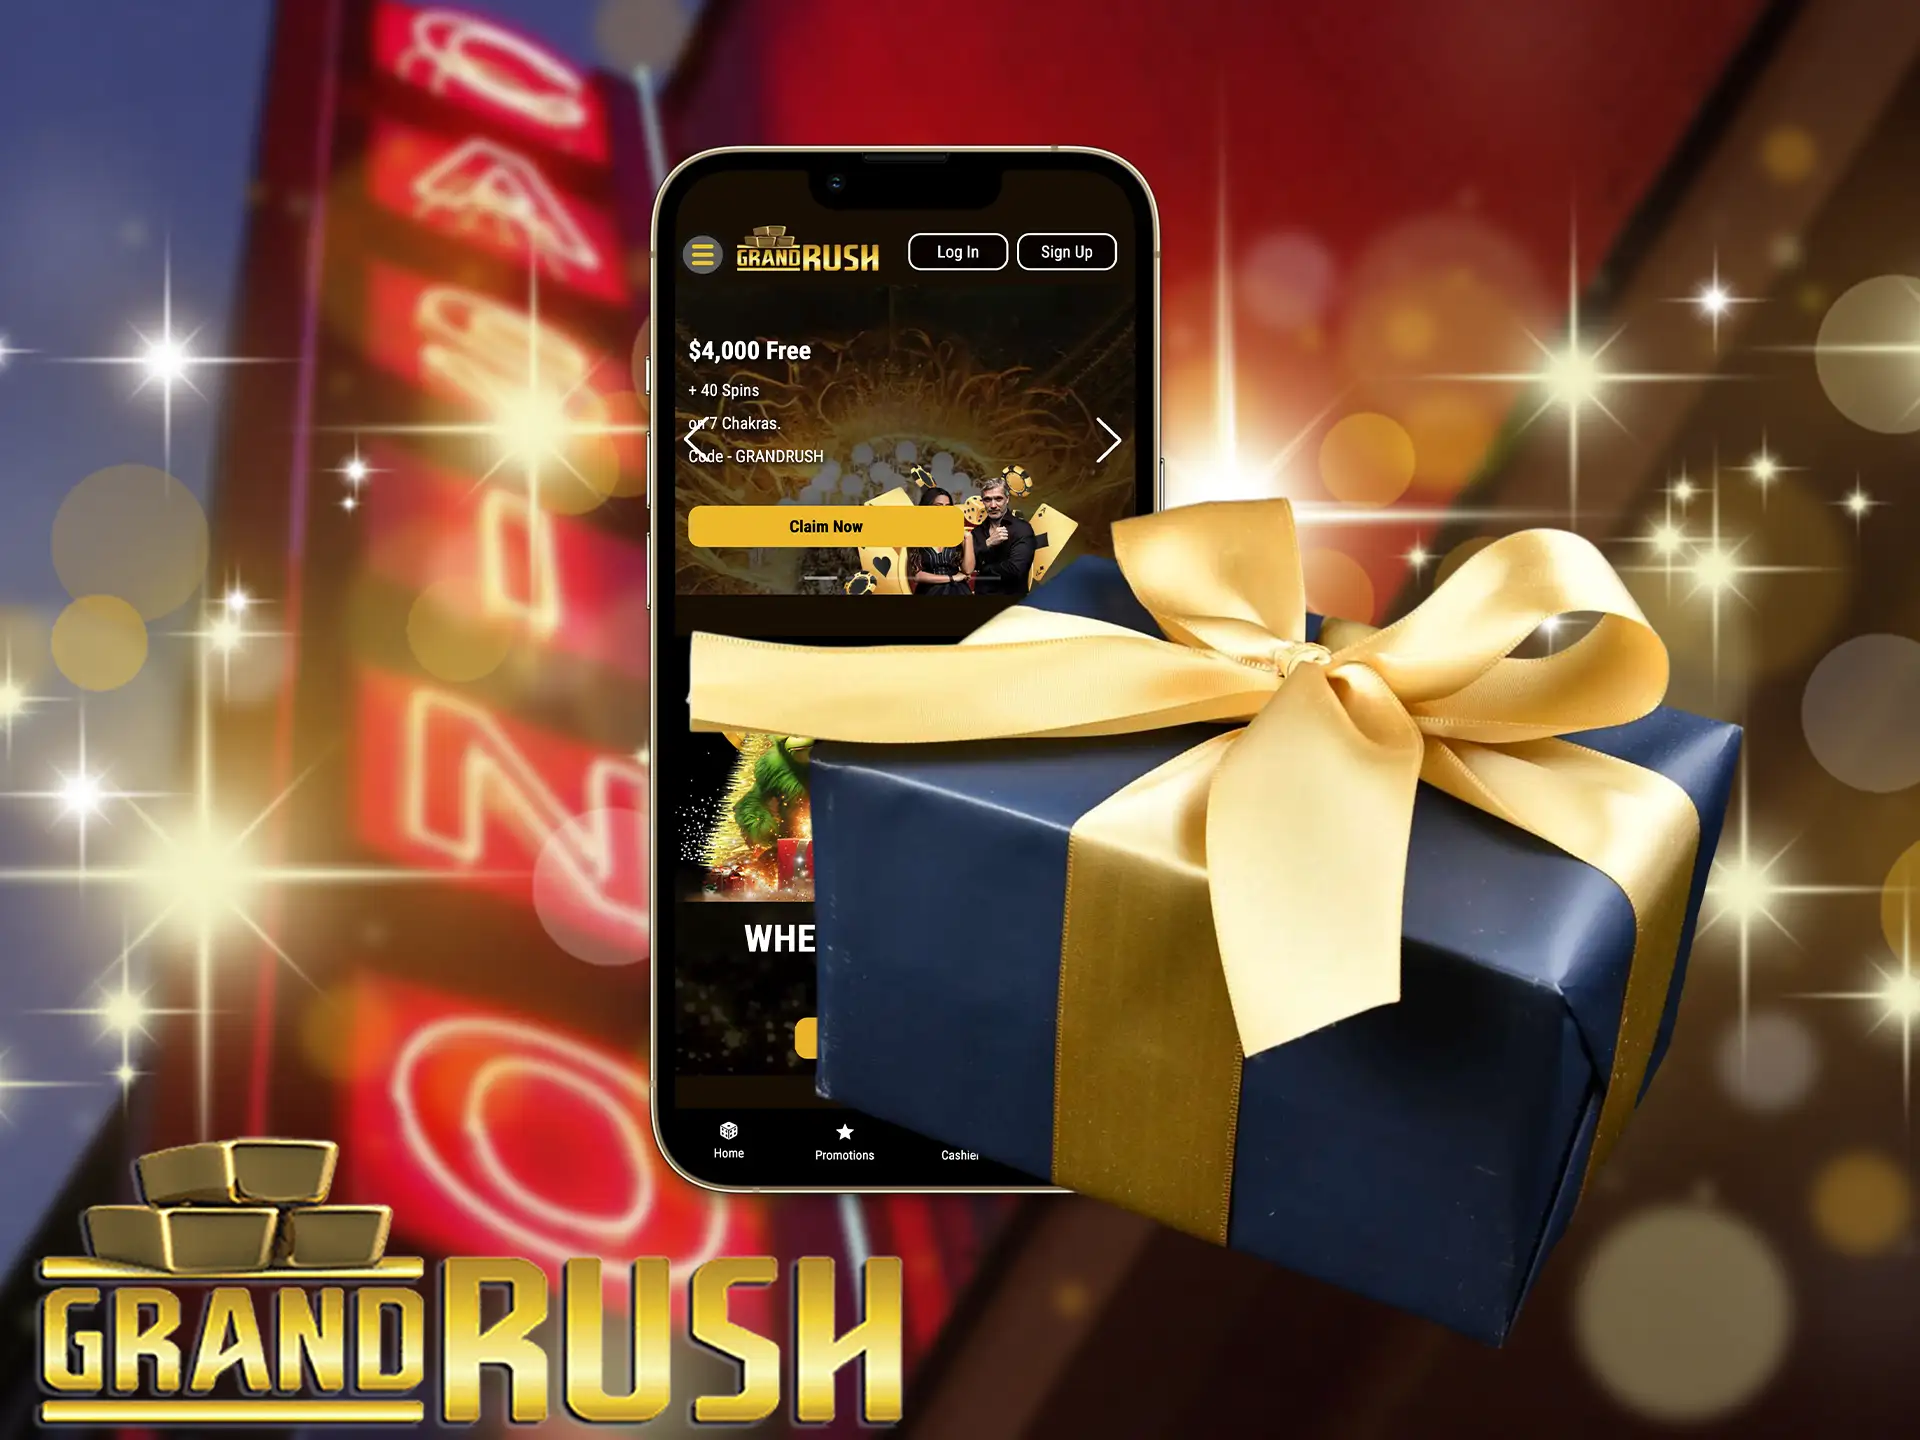 Claim a welcome bonus of up to AUD 6,000 in the Grand Rush casino app.